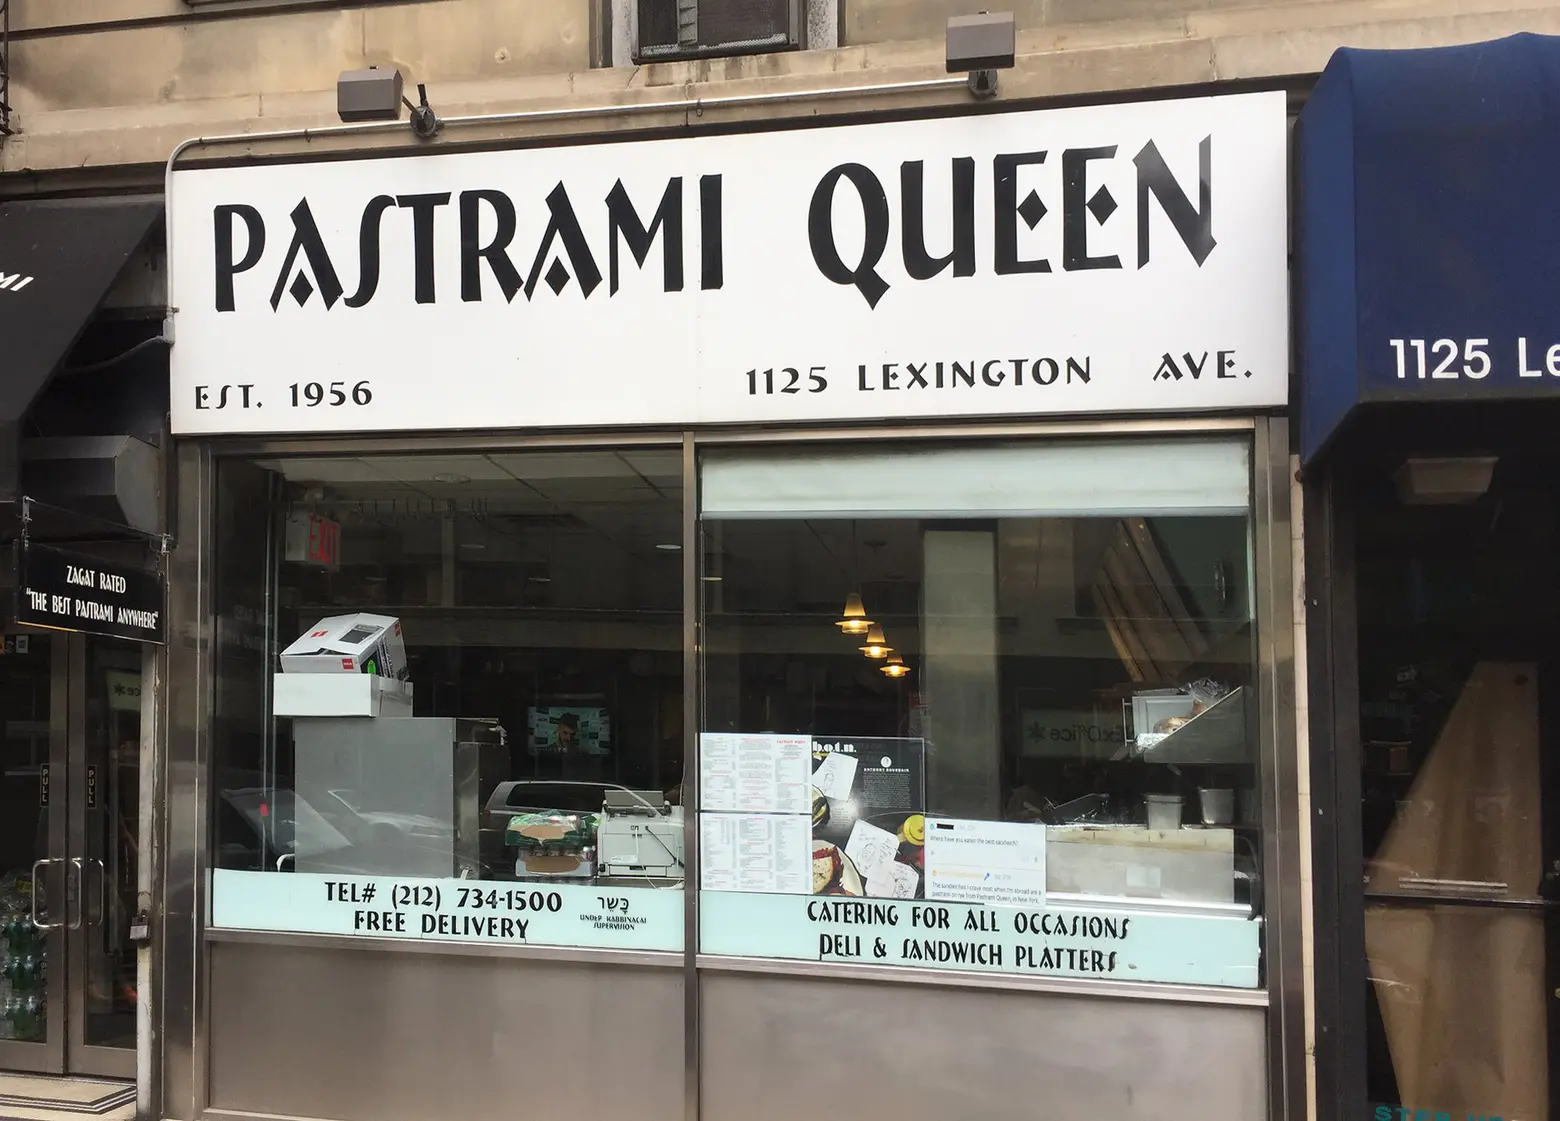 64-year-old favorite Pastrami Queen opening second location on the Upper West Side